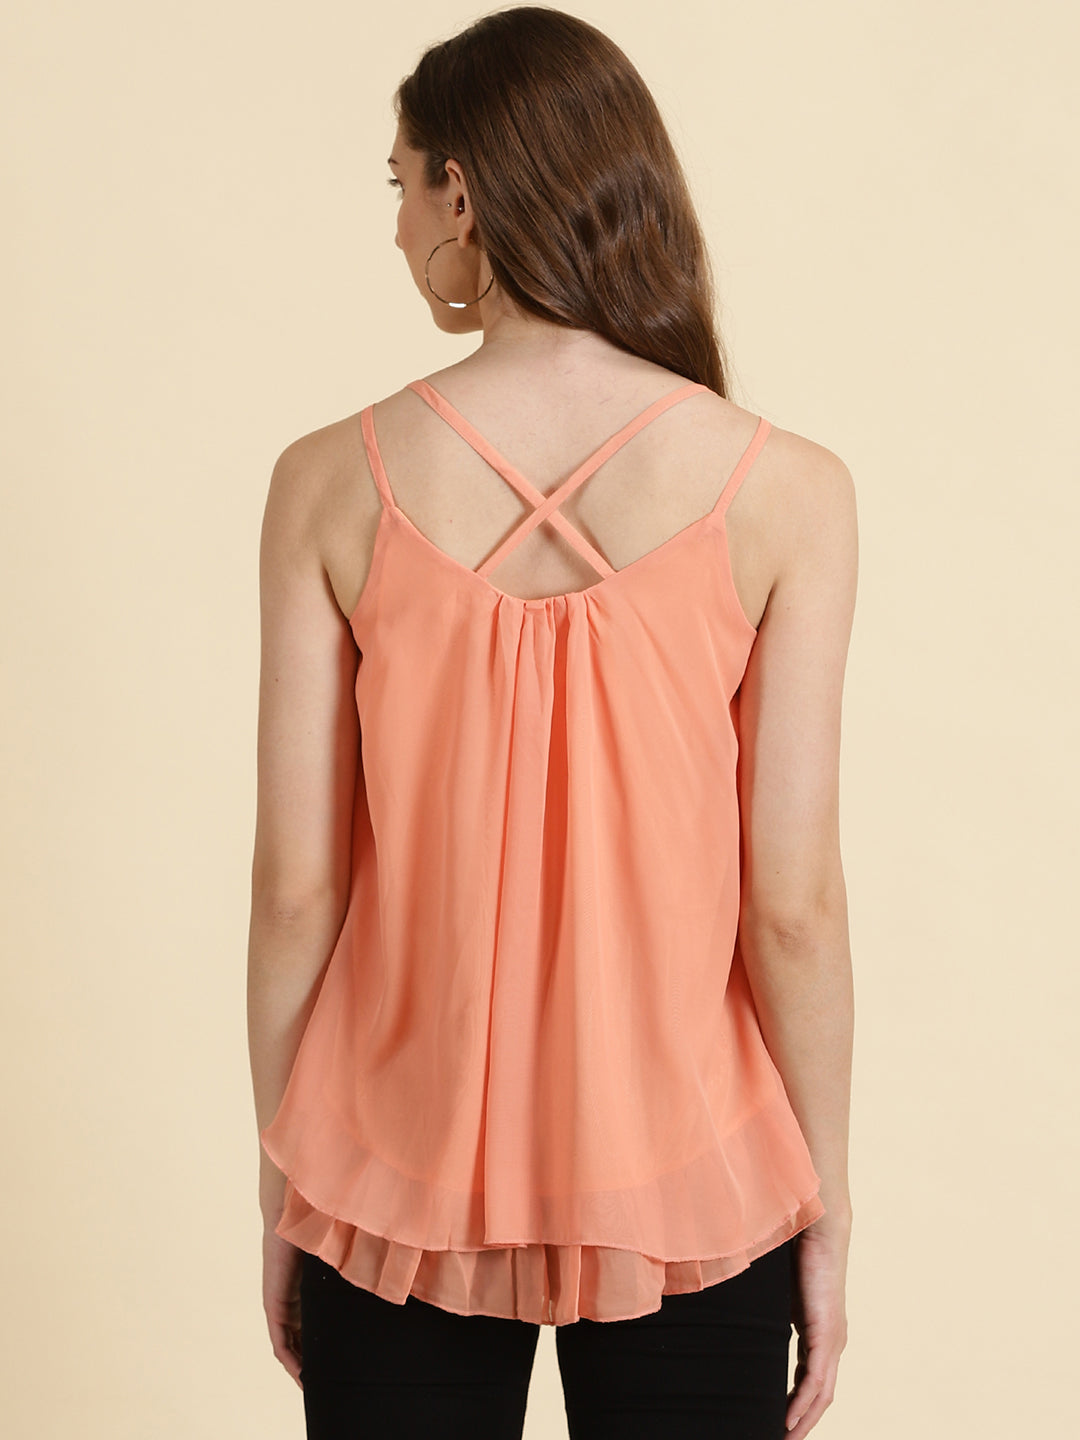 Women's Peach Solid A-Line Top